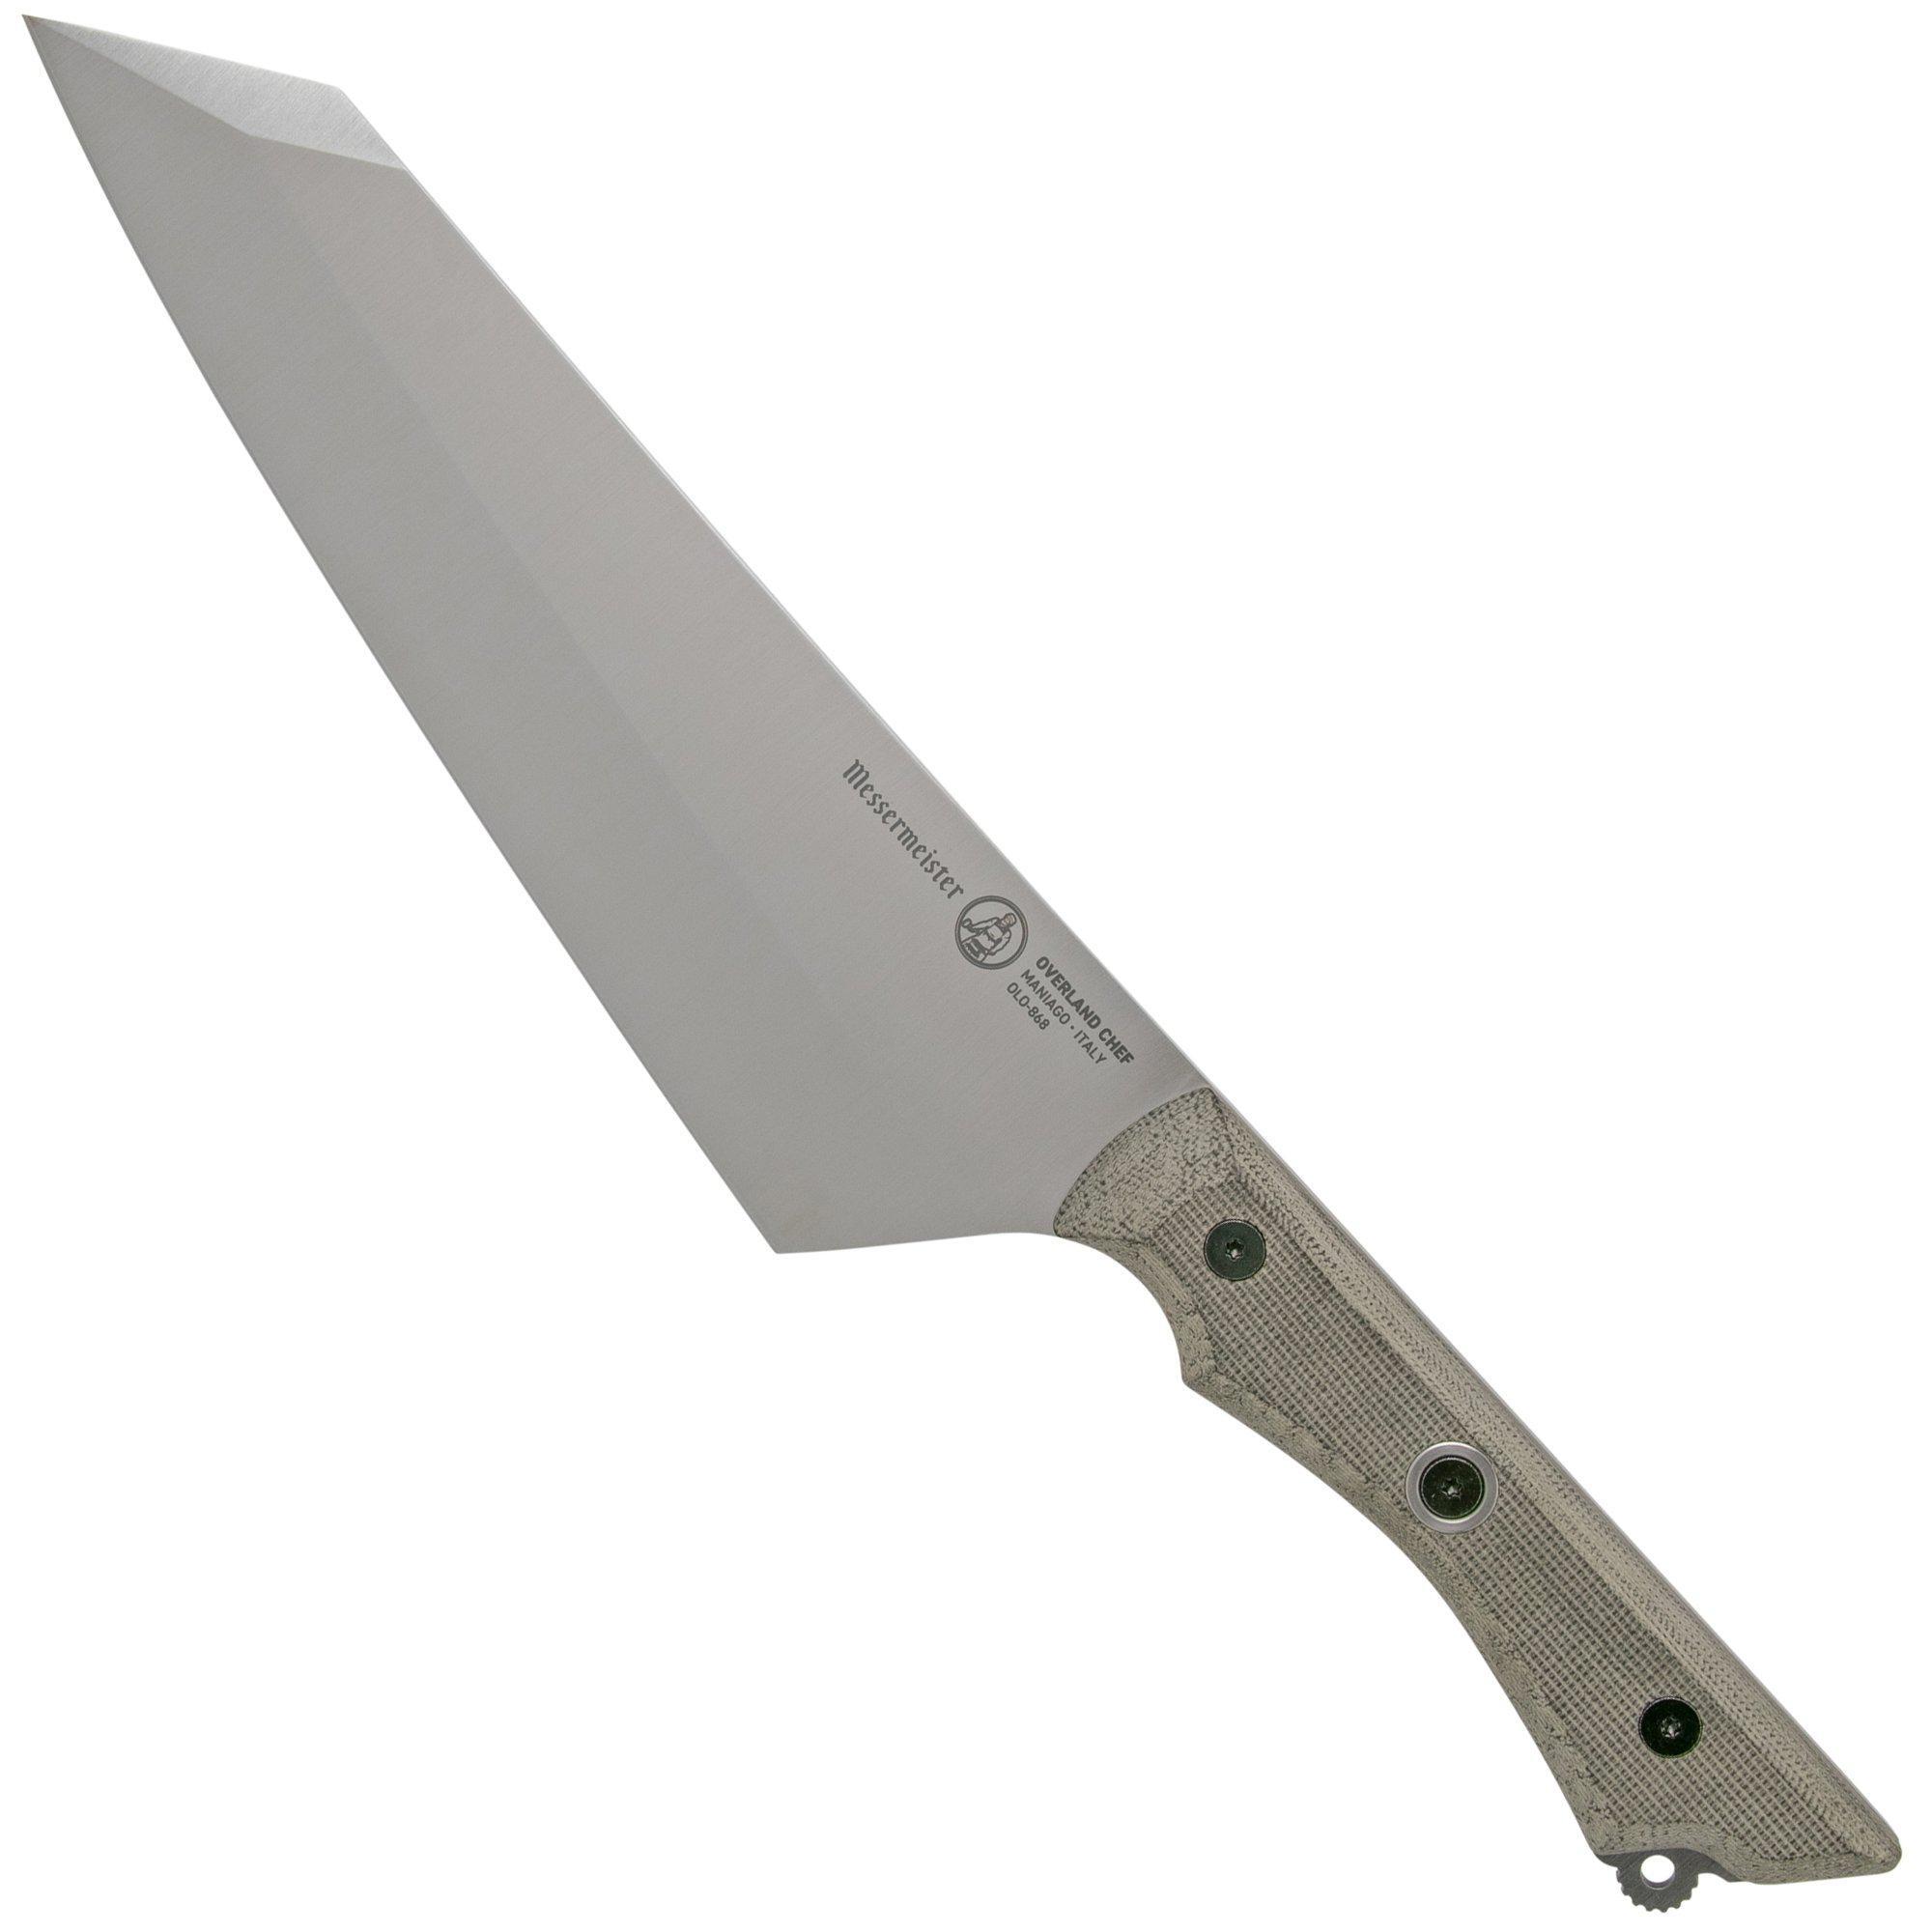 Messermeister Overland Chef’s Knife 8? OLO-868 outdoor keukenmes, 20 cm